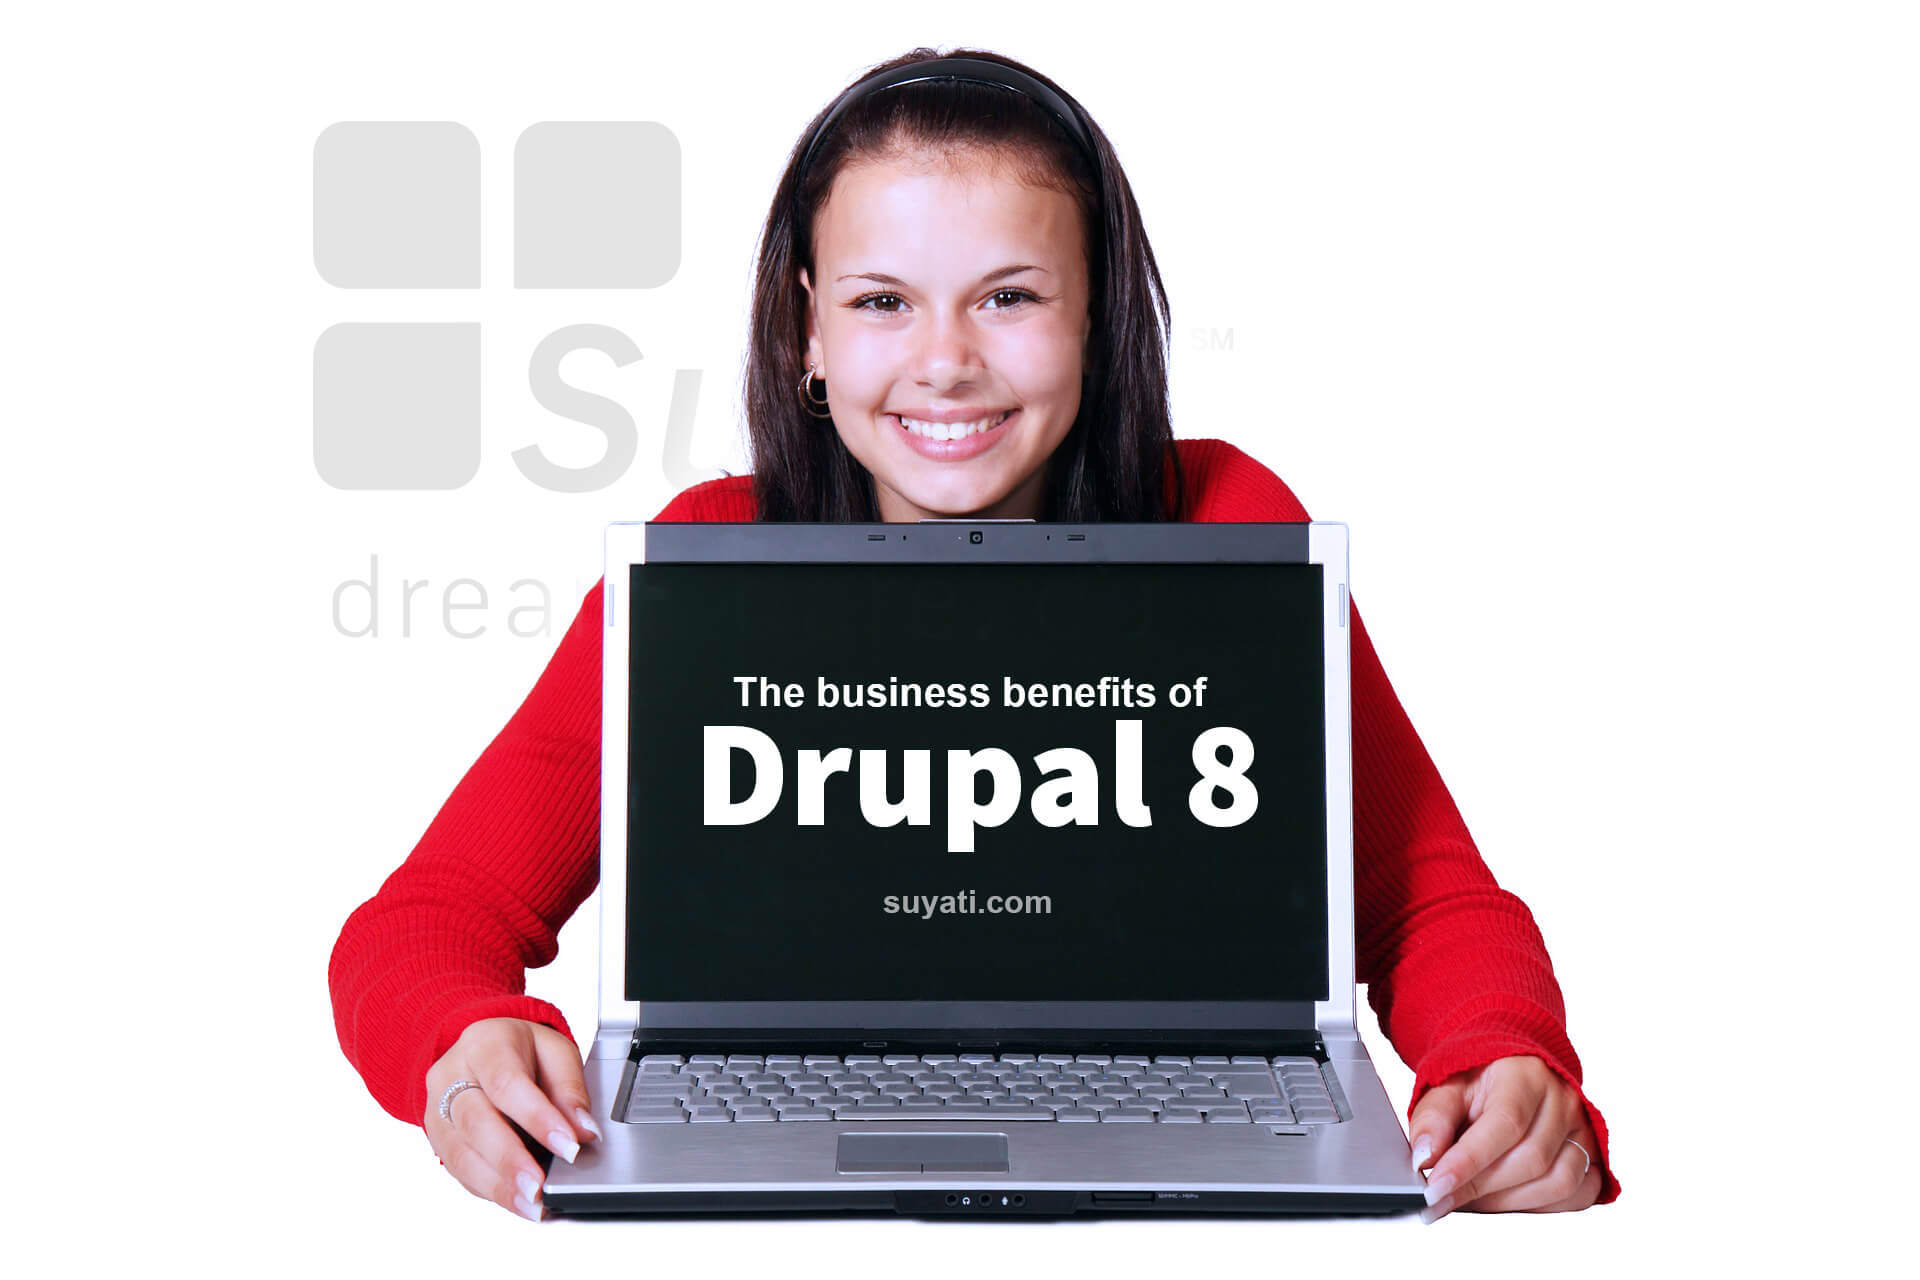 How Drupal 8 benefits your business